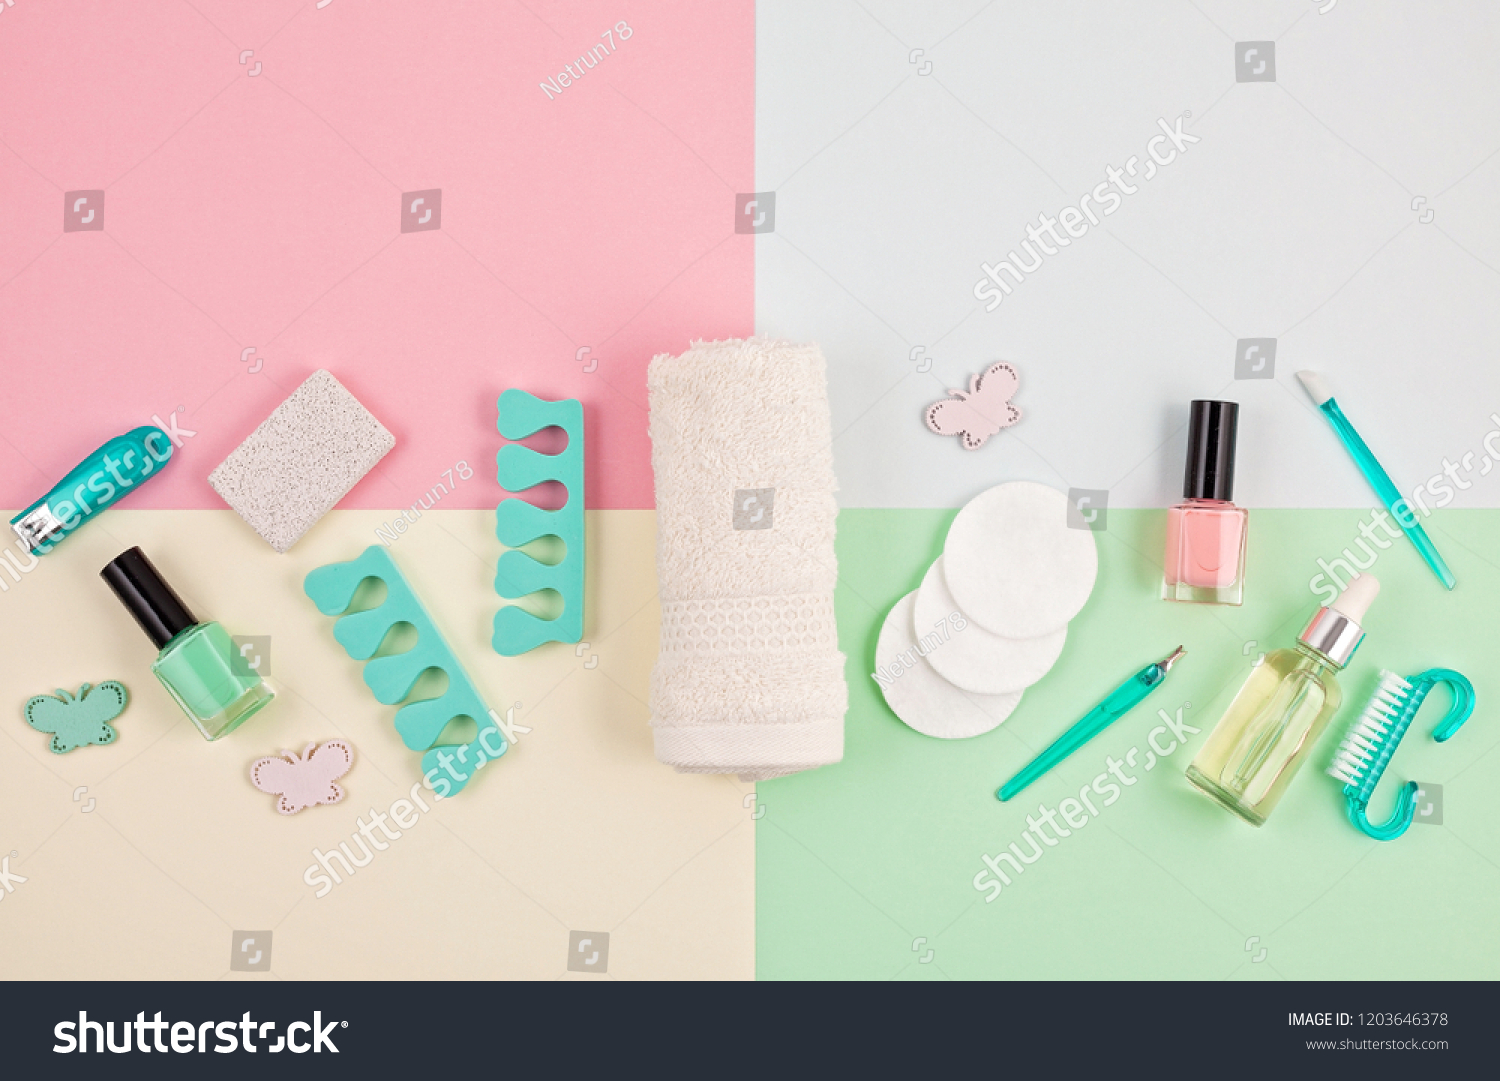 Download Mockup Beauty Cosmetic Products Manicure Pedicure Stock Photo Edit Now 1203646378